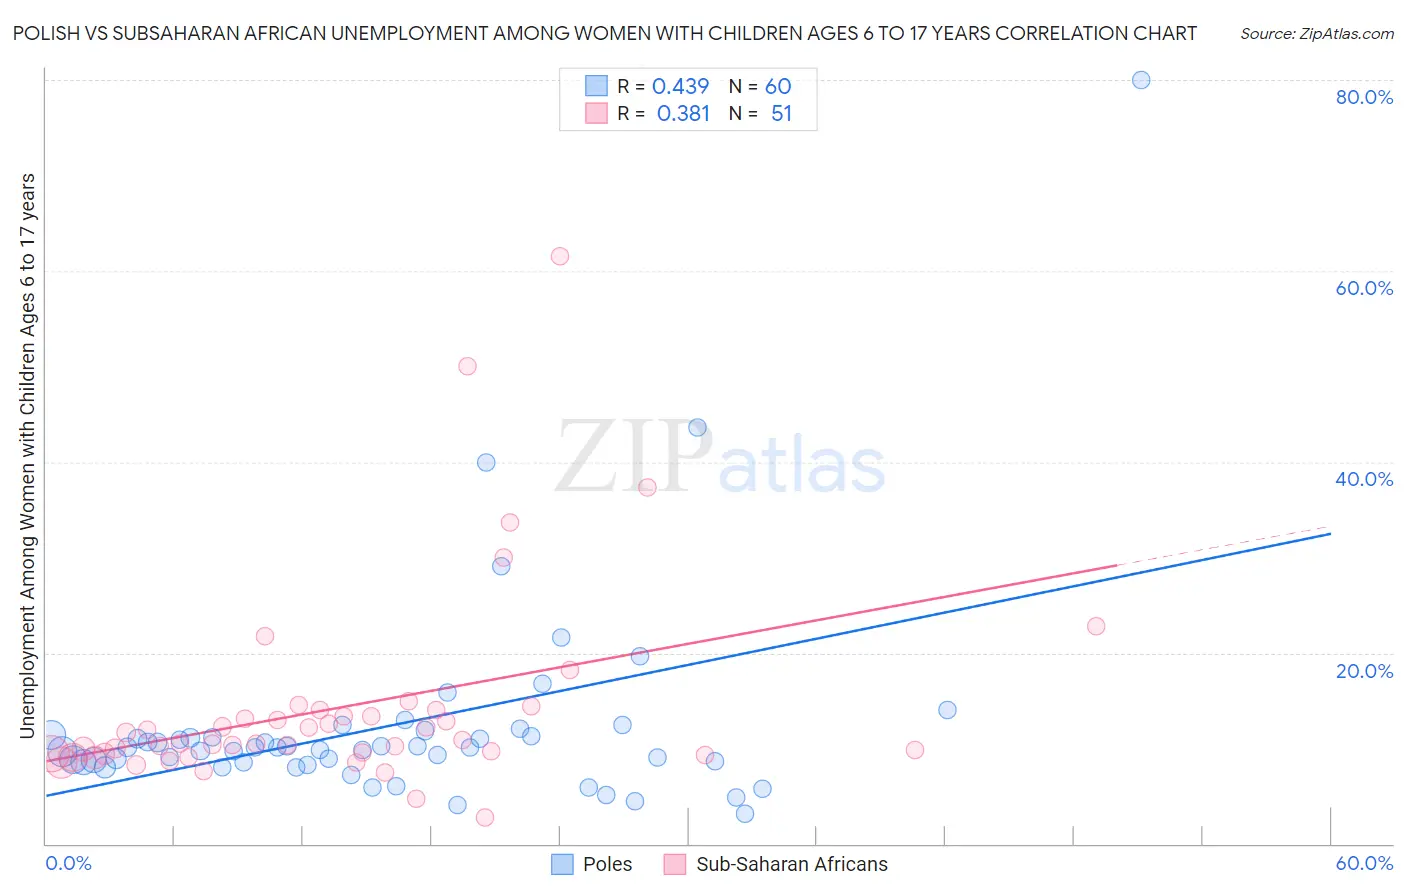 Polish vs Subsaharan African Unemployment Among Women with Children Ages 6 to 17 years